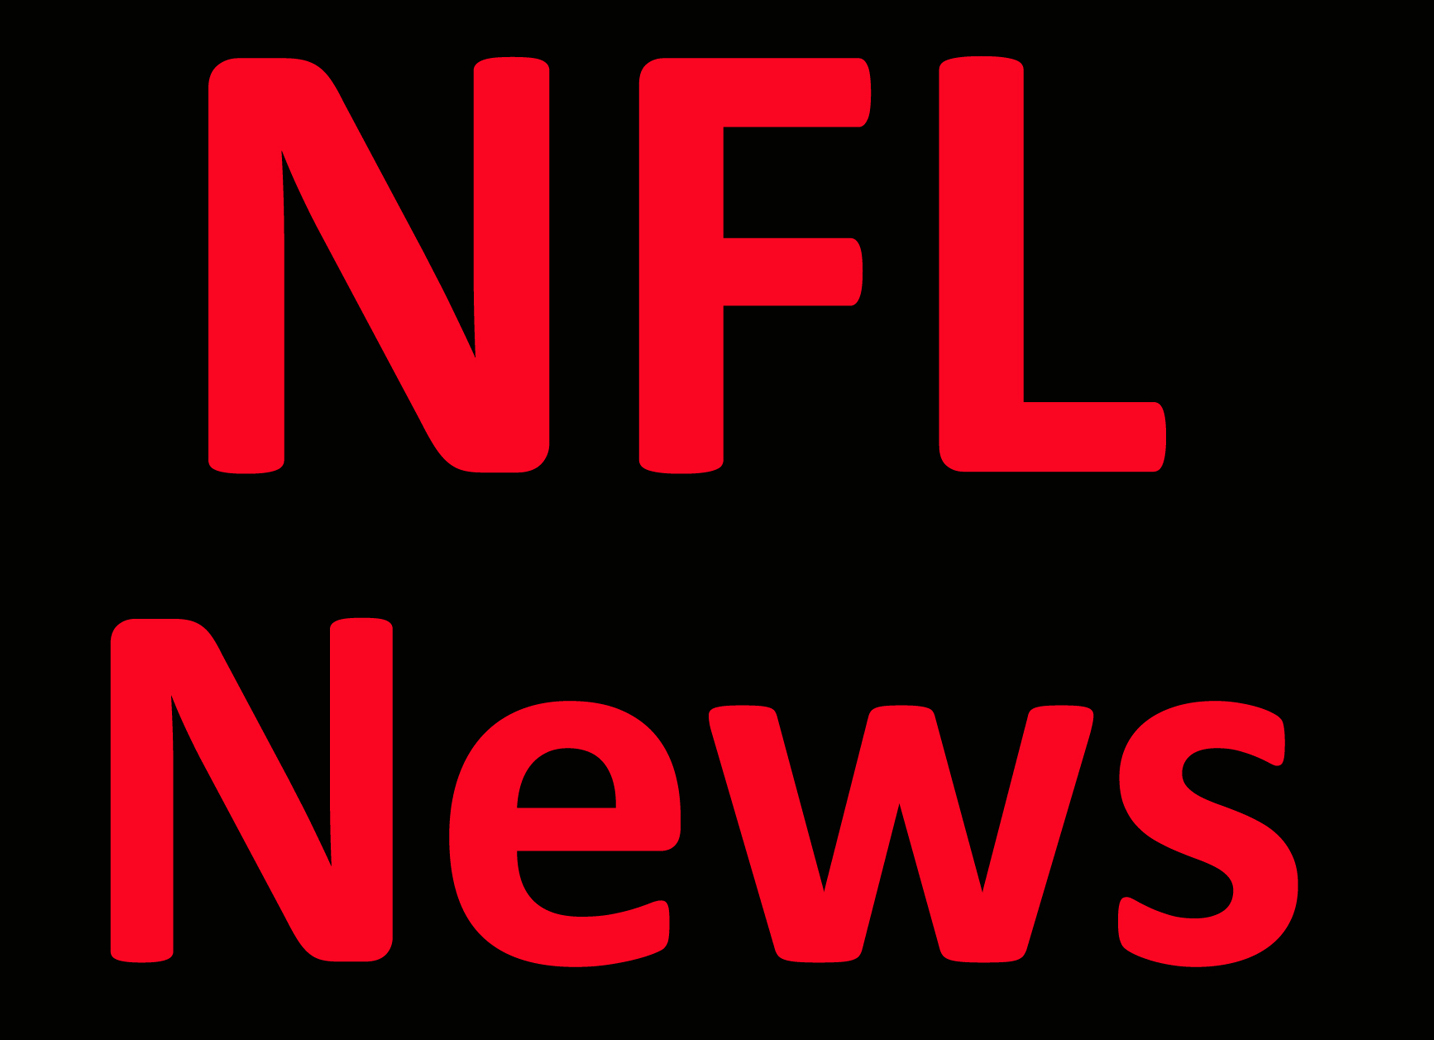 NFL News: Making the franchise-altering move: How NFL decision-makers navigate post-trade risk, criticism, second-guessing Per Report